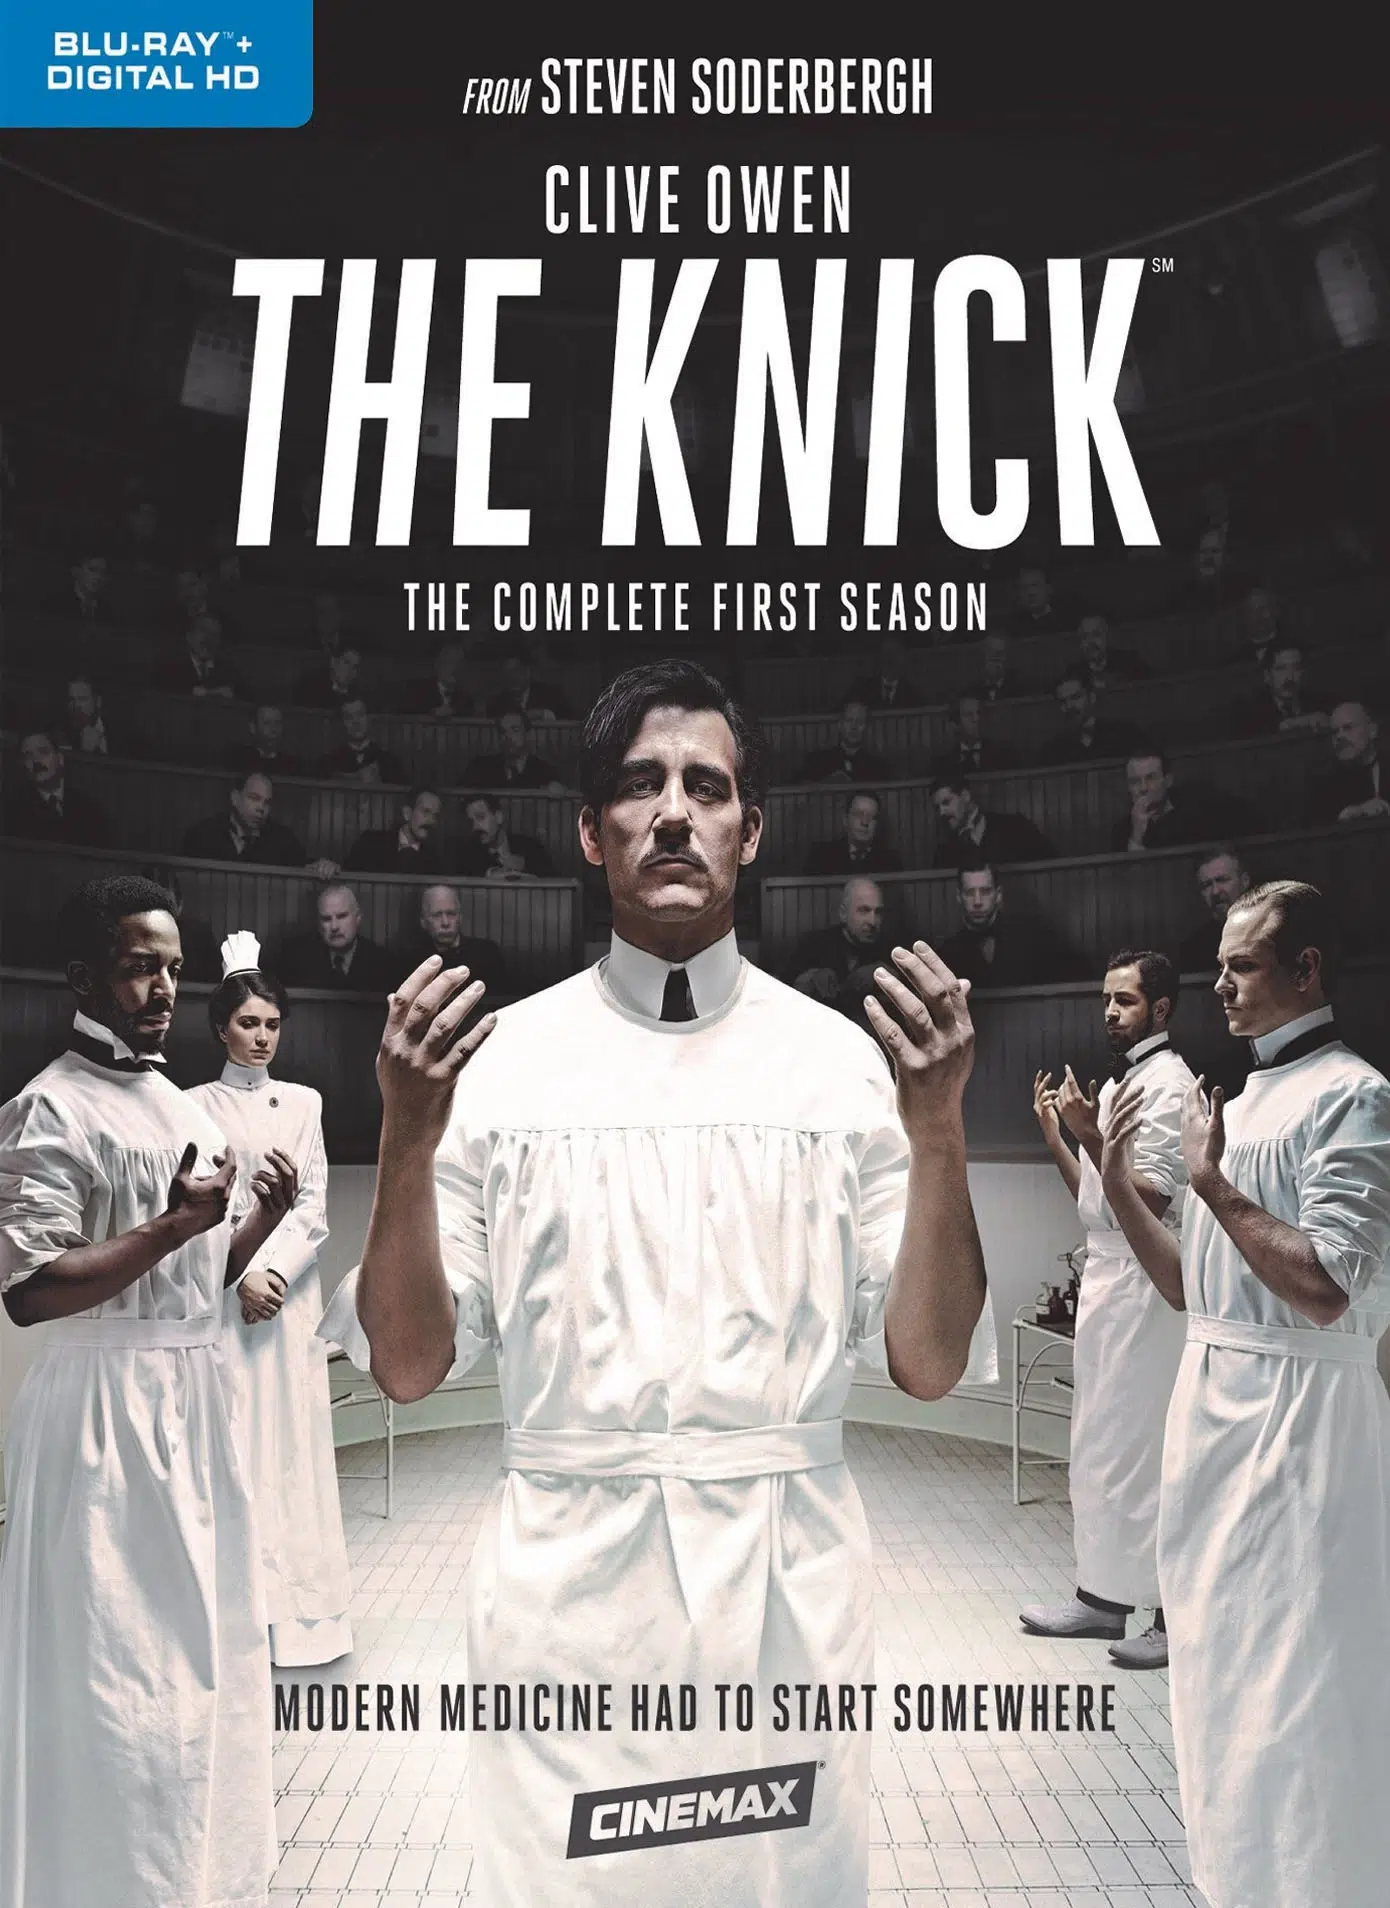 the knick serie medical